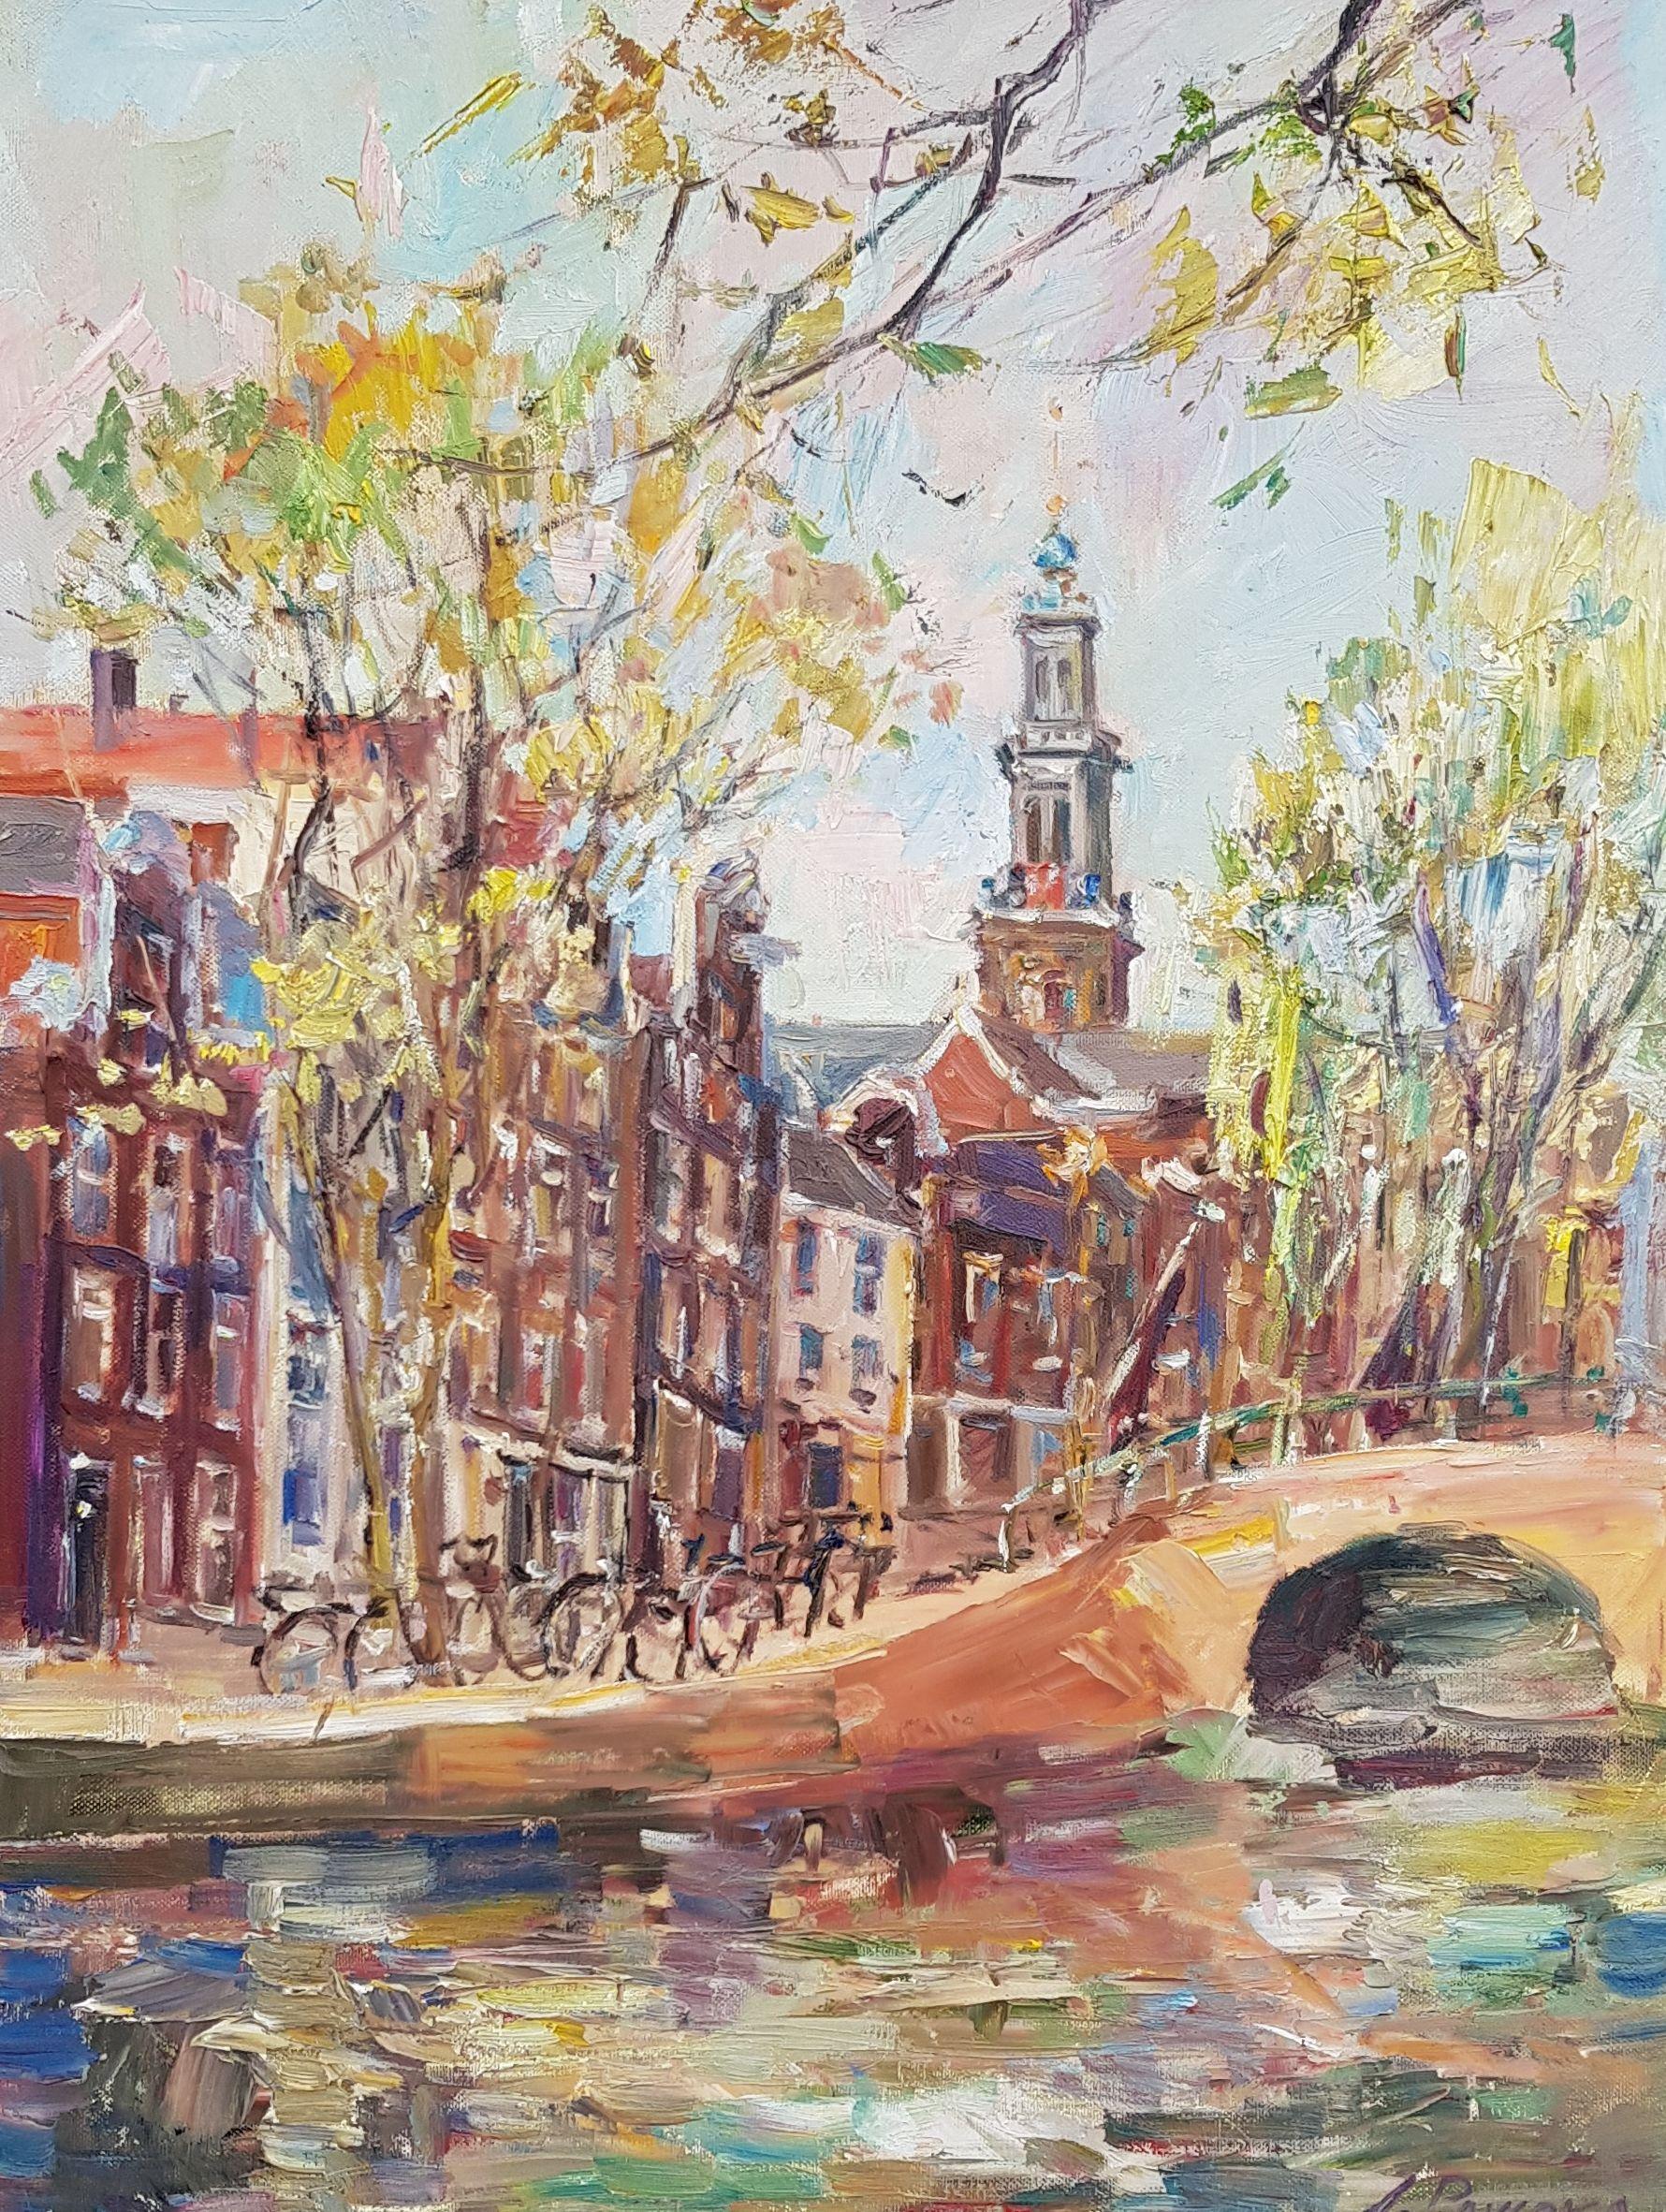 That is famous vertical of Amsterdam, Western Church, located at Prinsengracht, close to Anna Frankk's museum, very recognizable  high building.You can see it fr om many different canals and  perspective. :: Painting :: Impressionist :: This piece